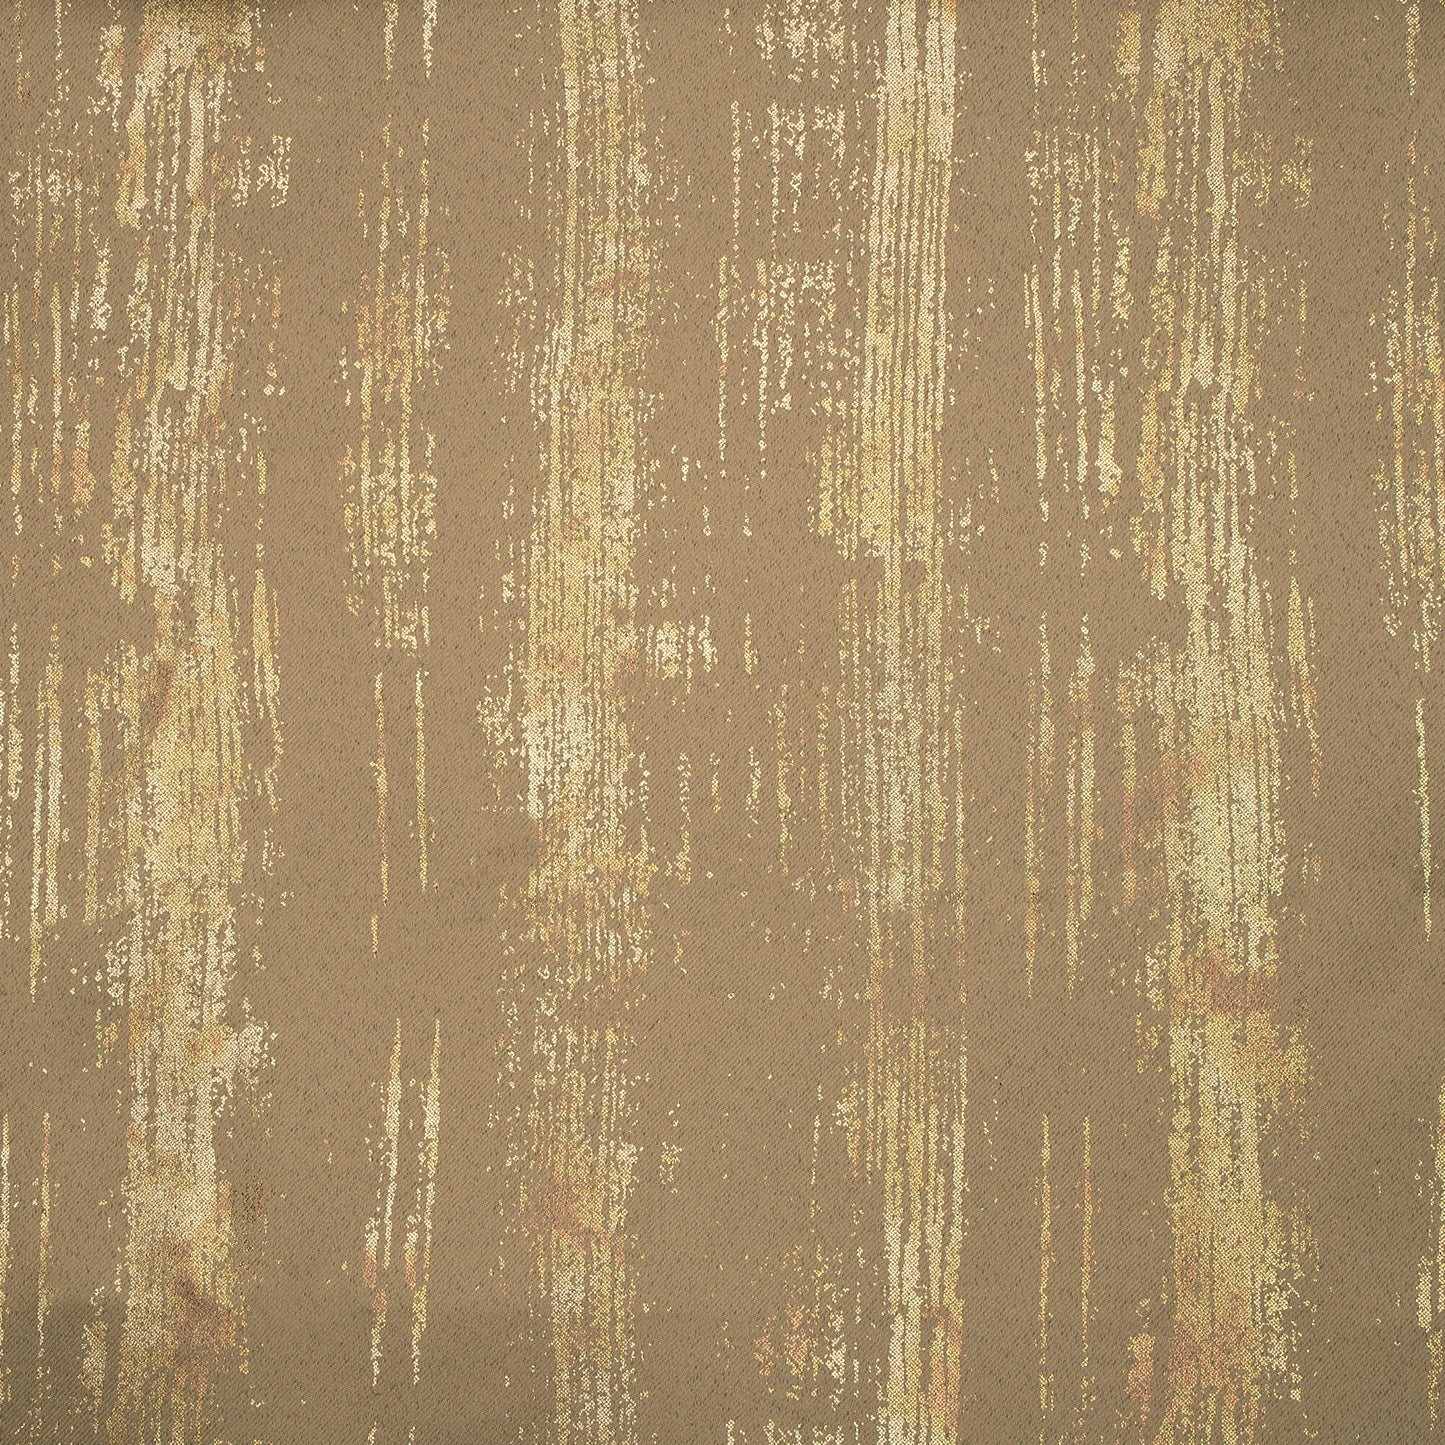 Brown Texture Pattern Golden Foil Premium Curtain Fabric (Width 54 Inches)